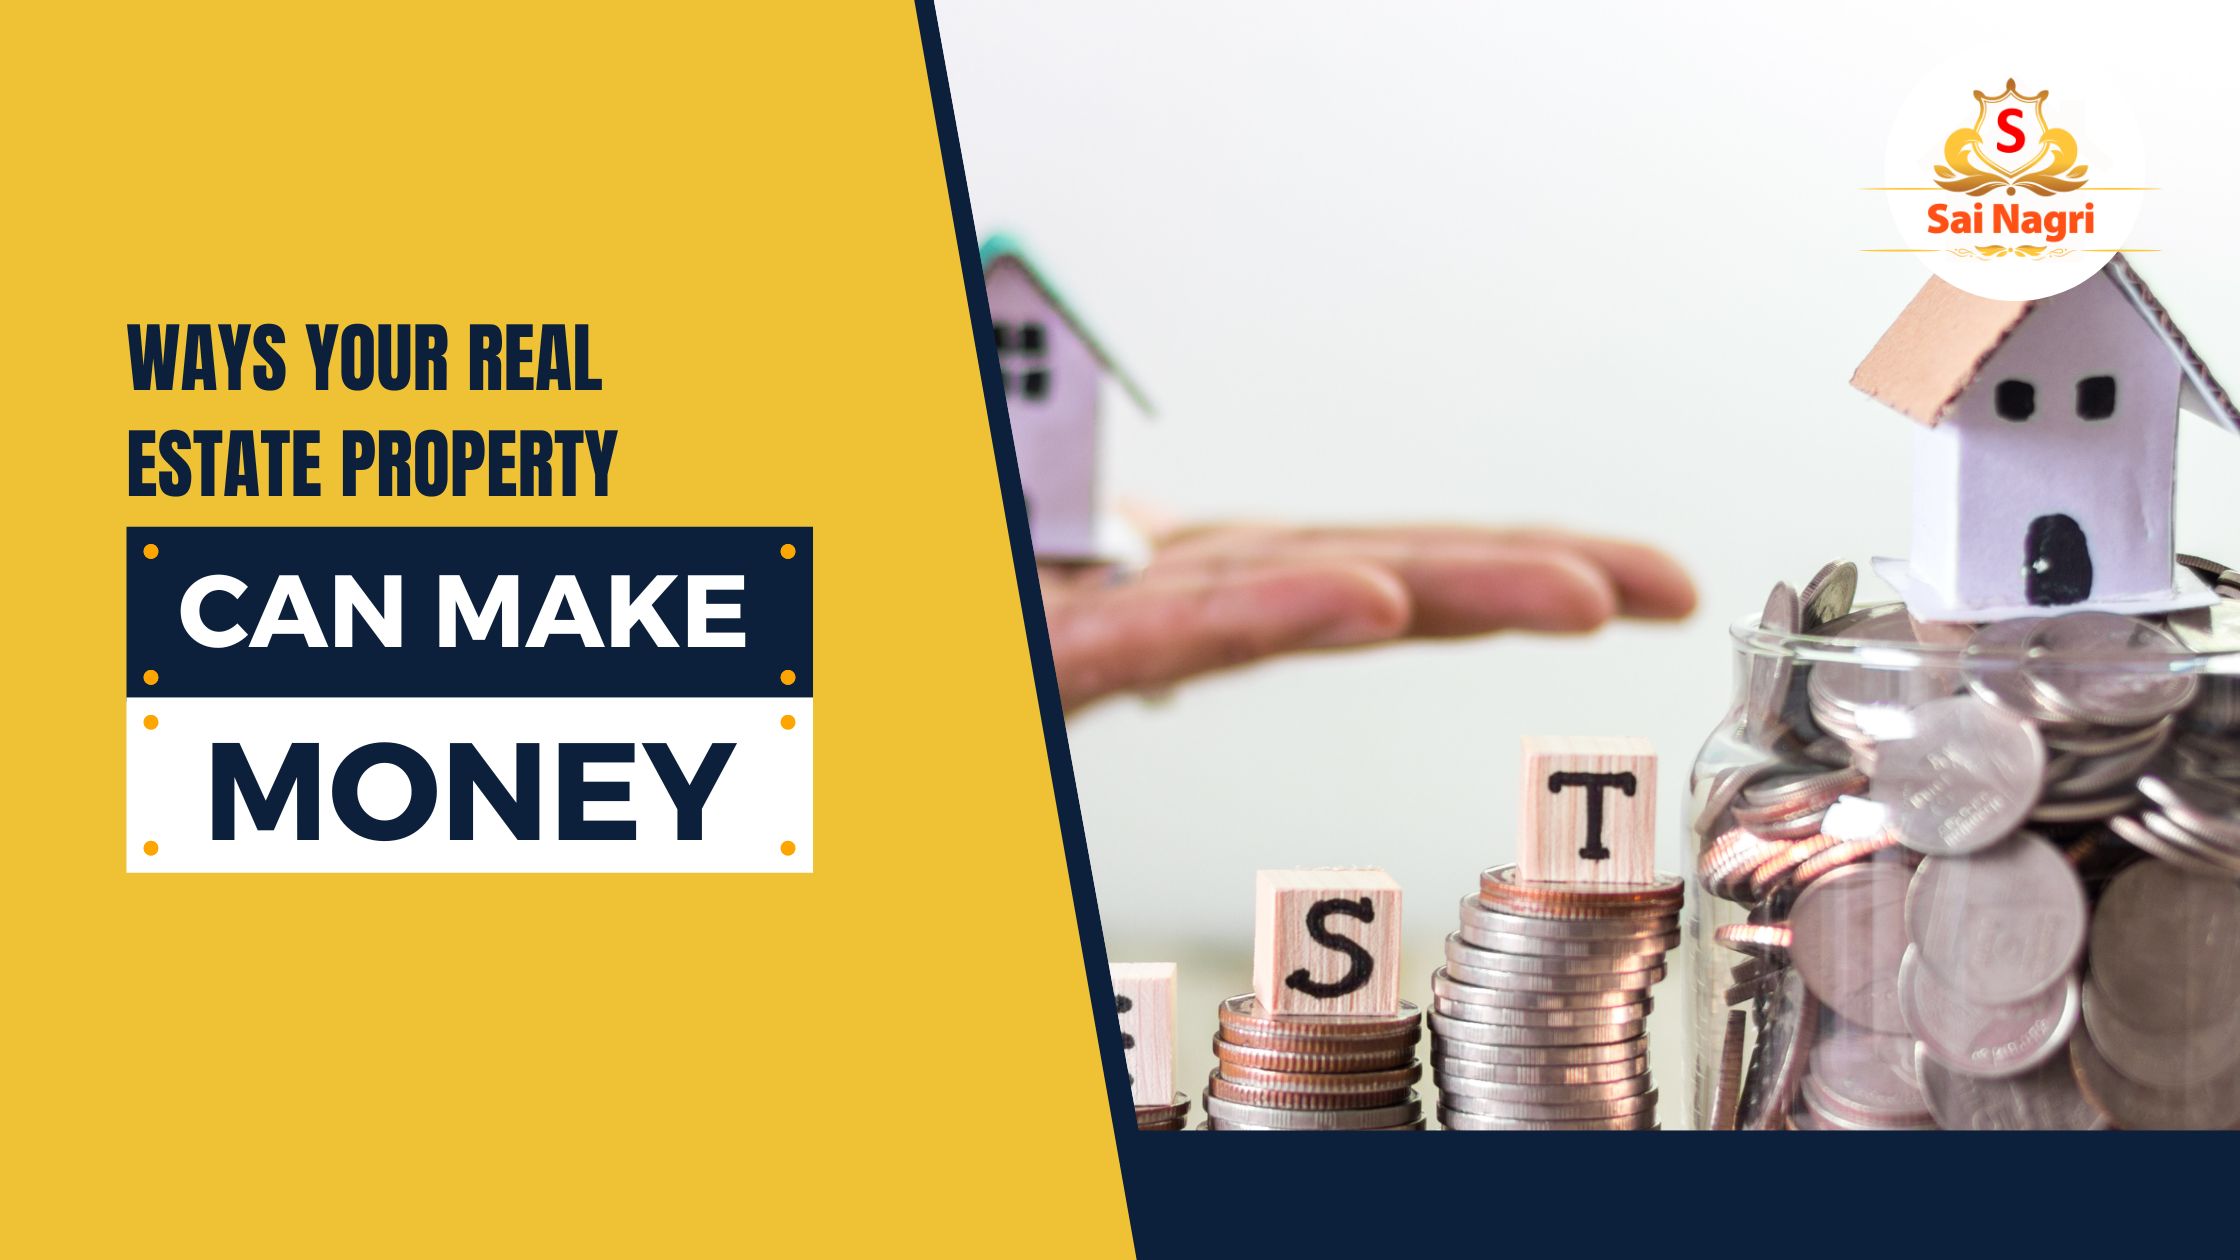  The 4 Ways Your Real Estate Property Can Make Money